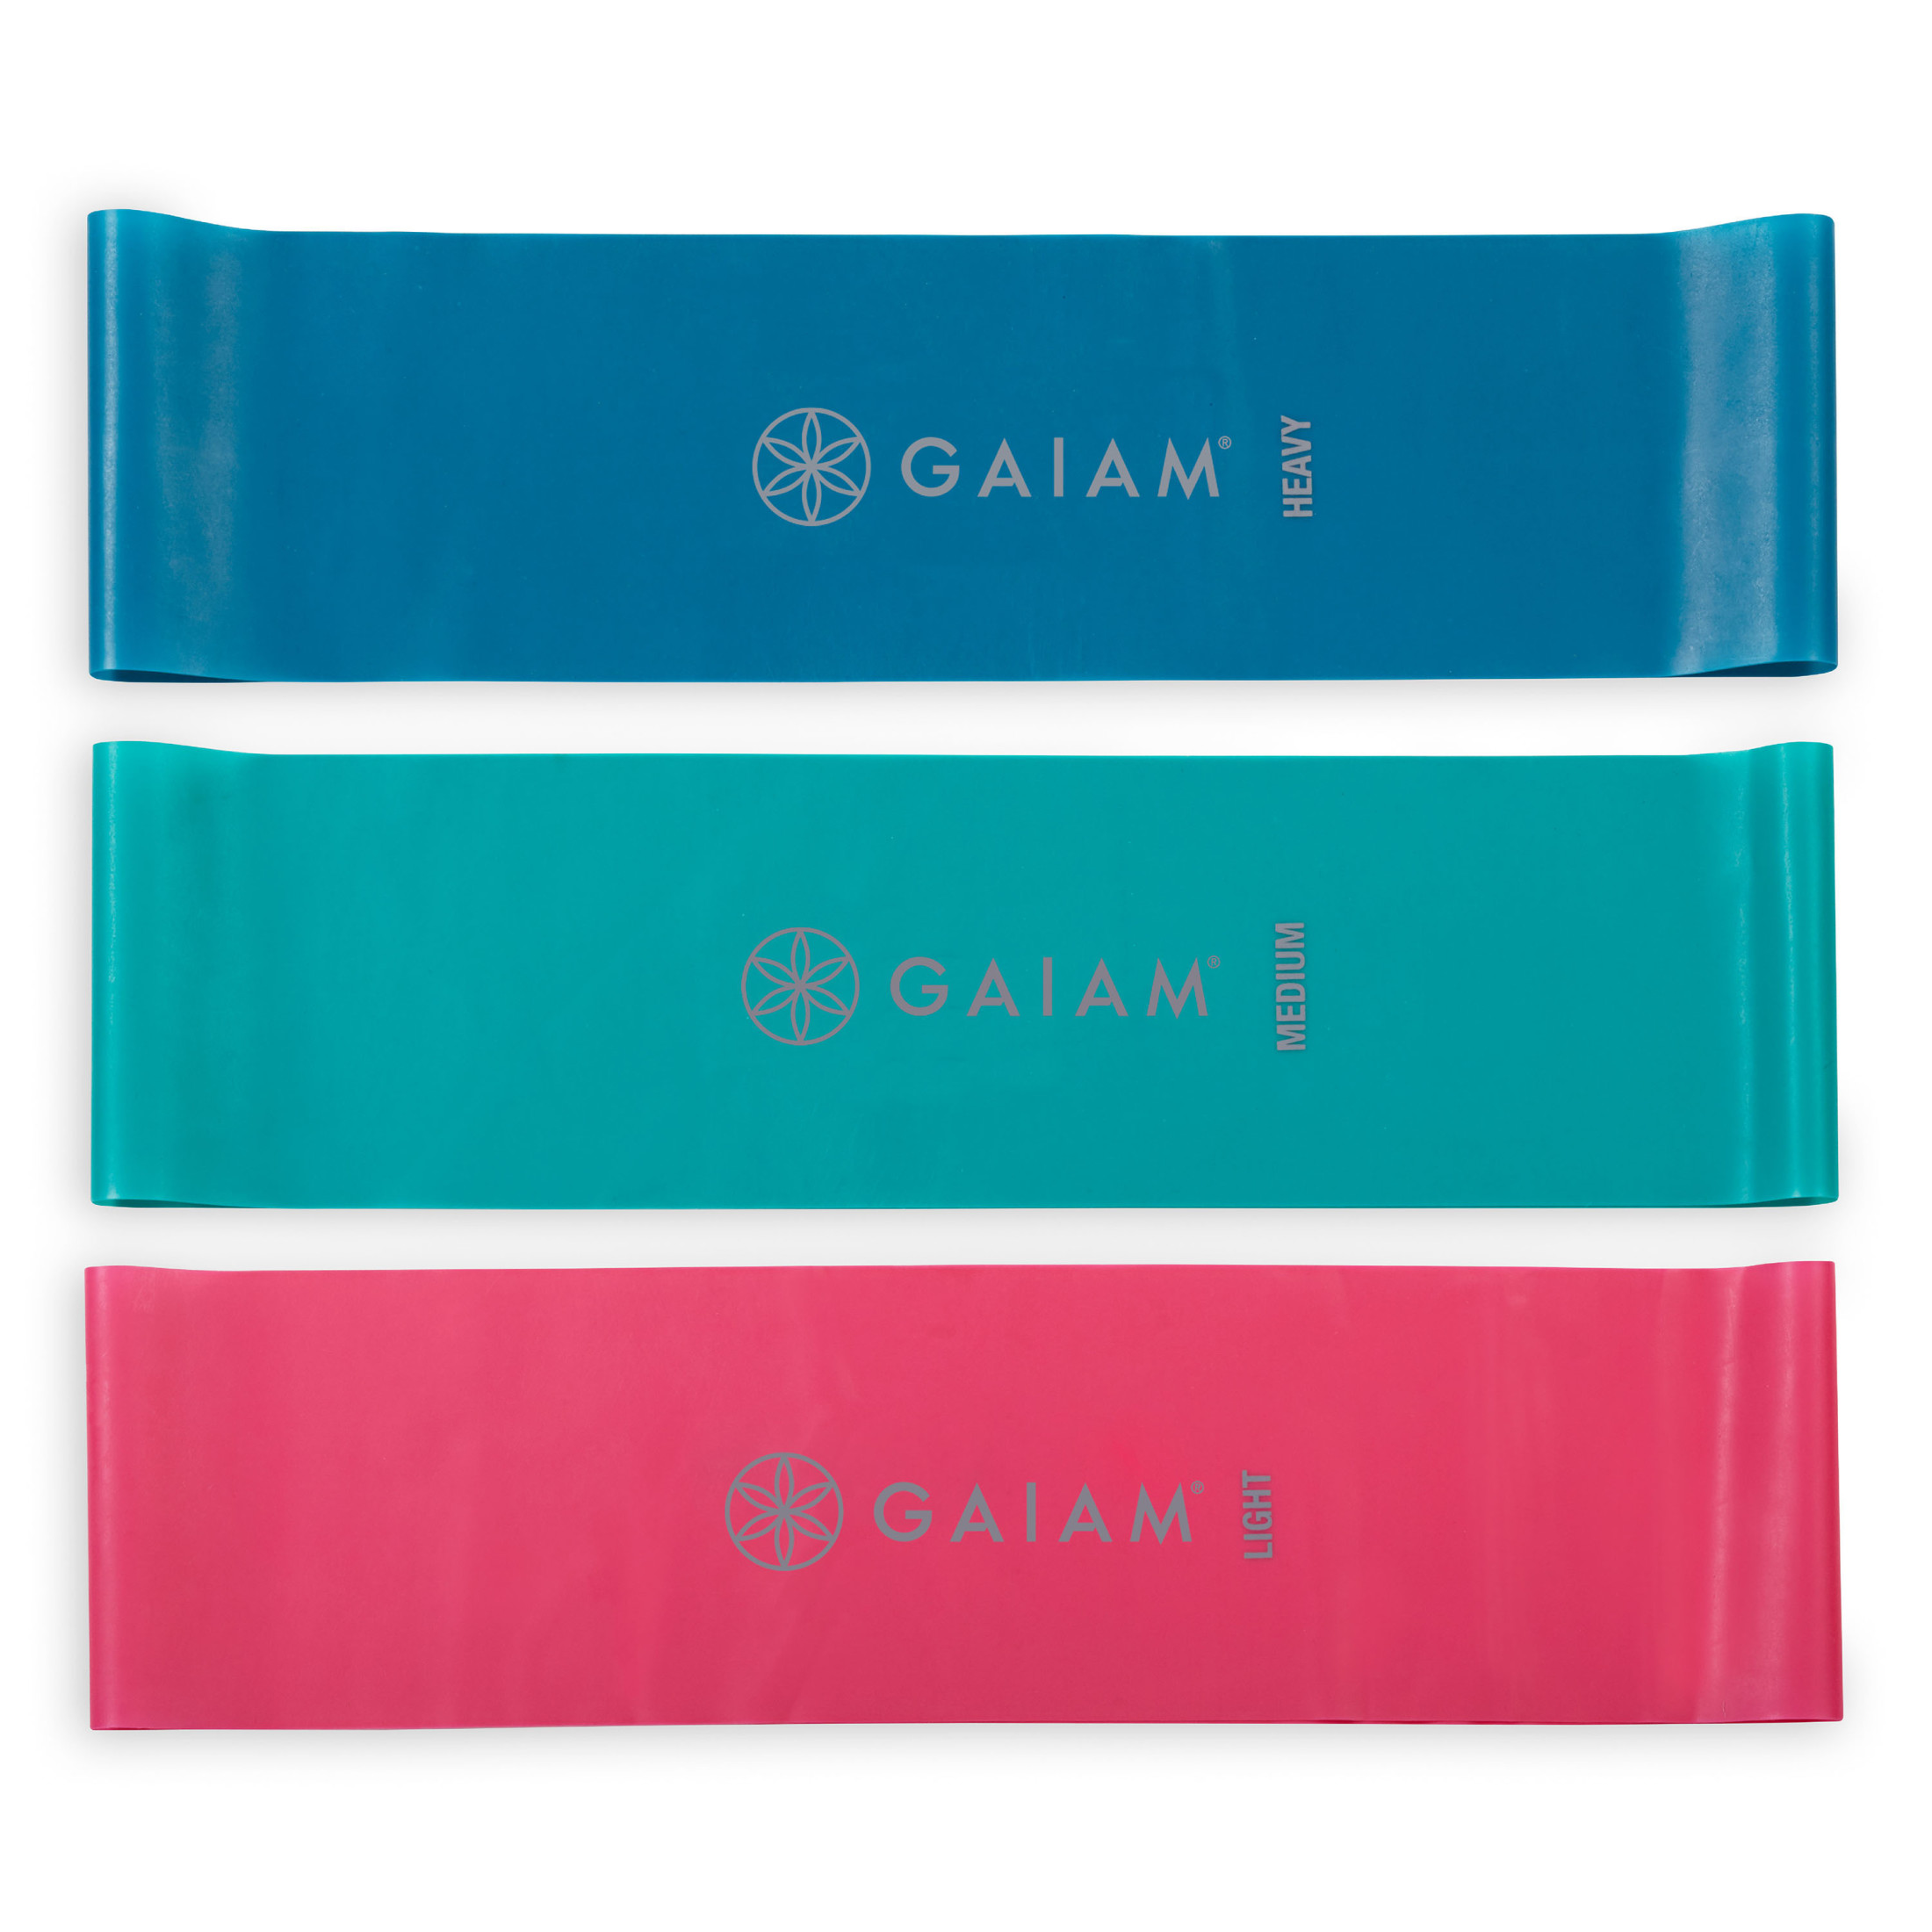 Gaiam Loop Band Kit, Includes Light, Medium and Heavy Resistance Levels, 3 Pk - image 1 of 6